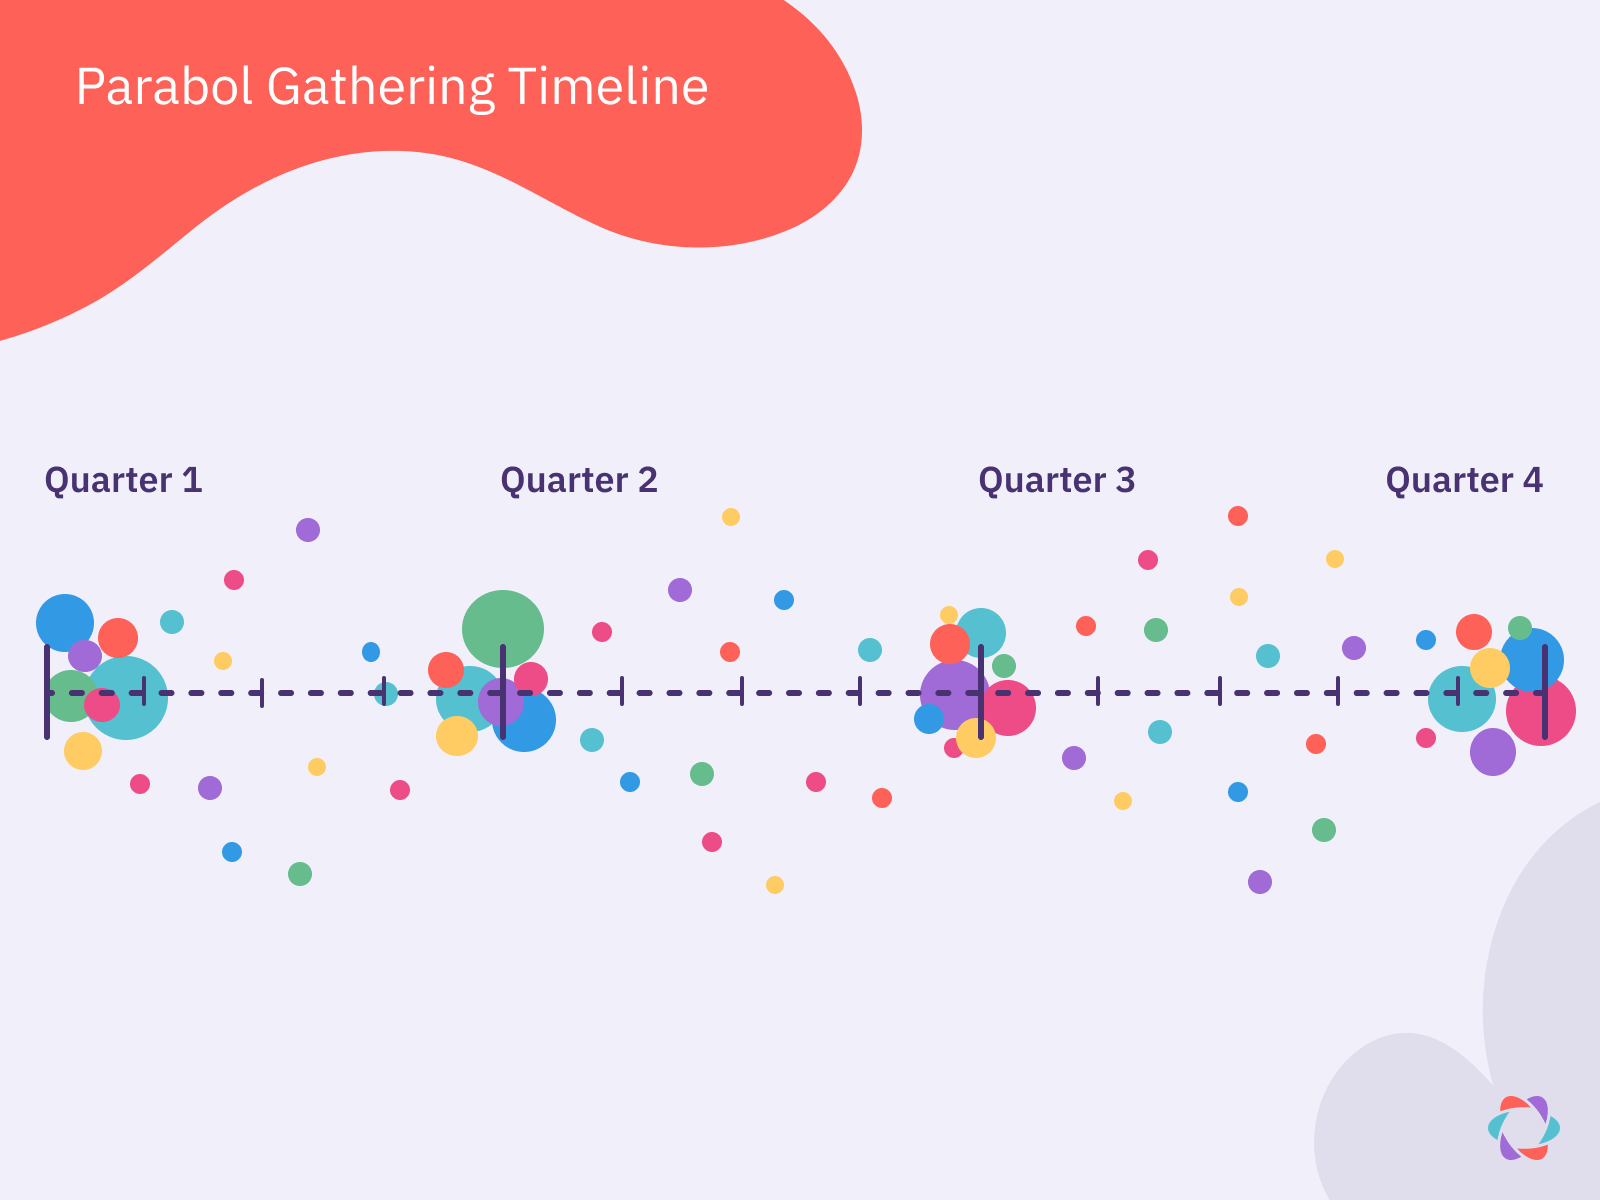 Parabol gathers on a quarterly basis in-person to reconnect. 